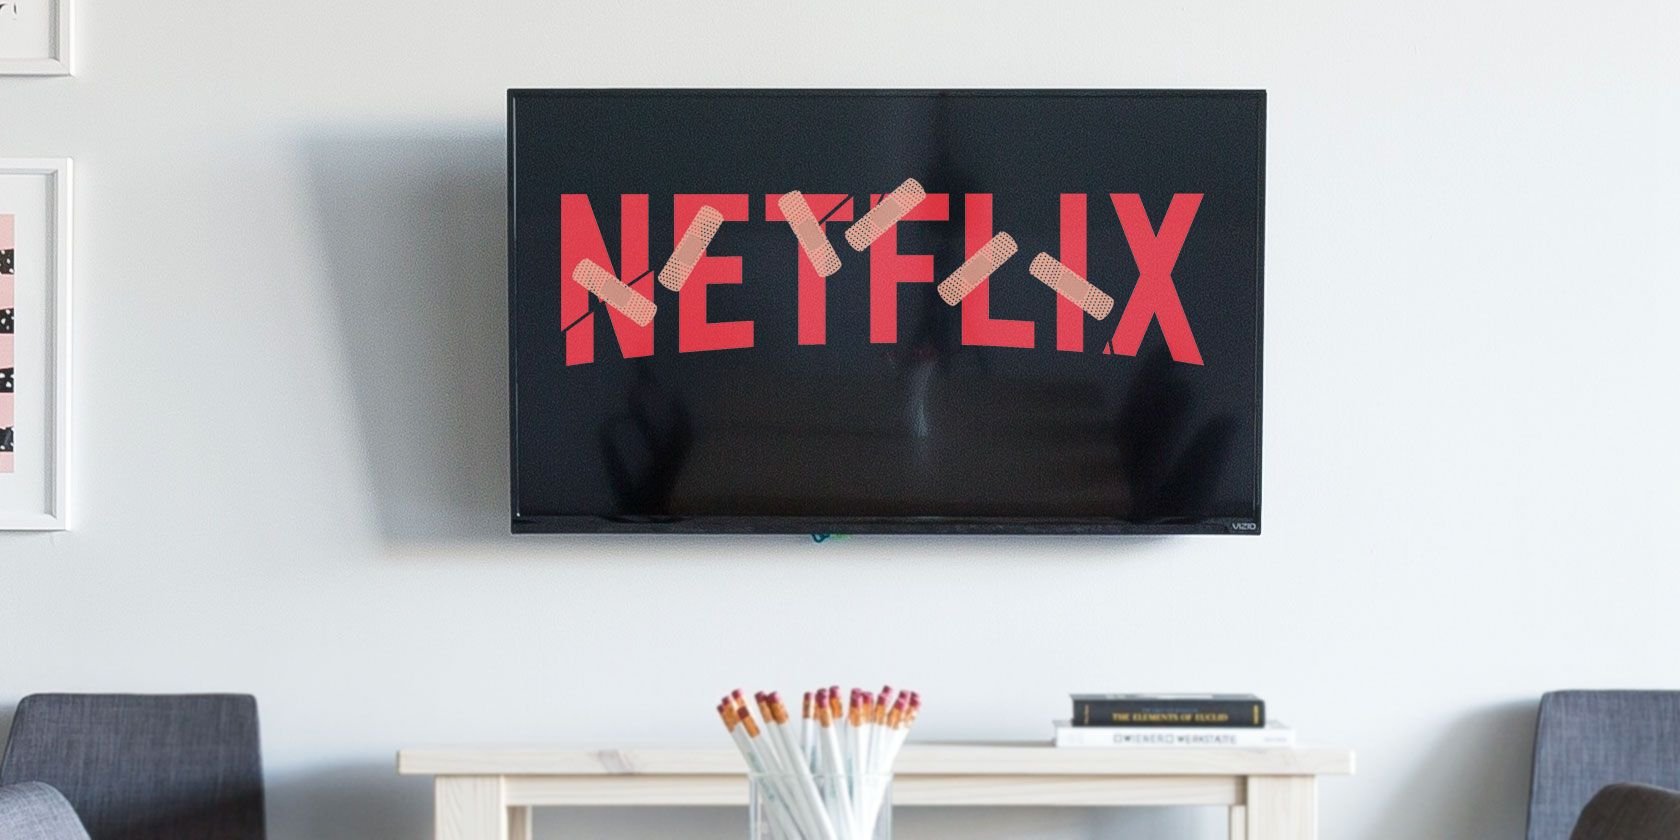 Netflix Not Working? 10 Ways to Fix Netflix Issues and Problems